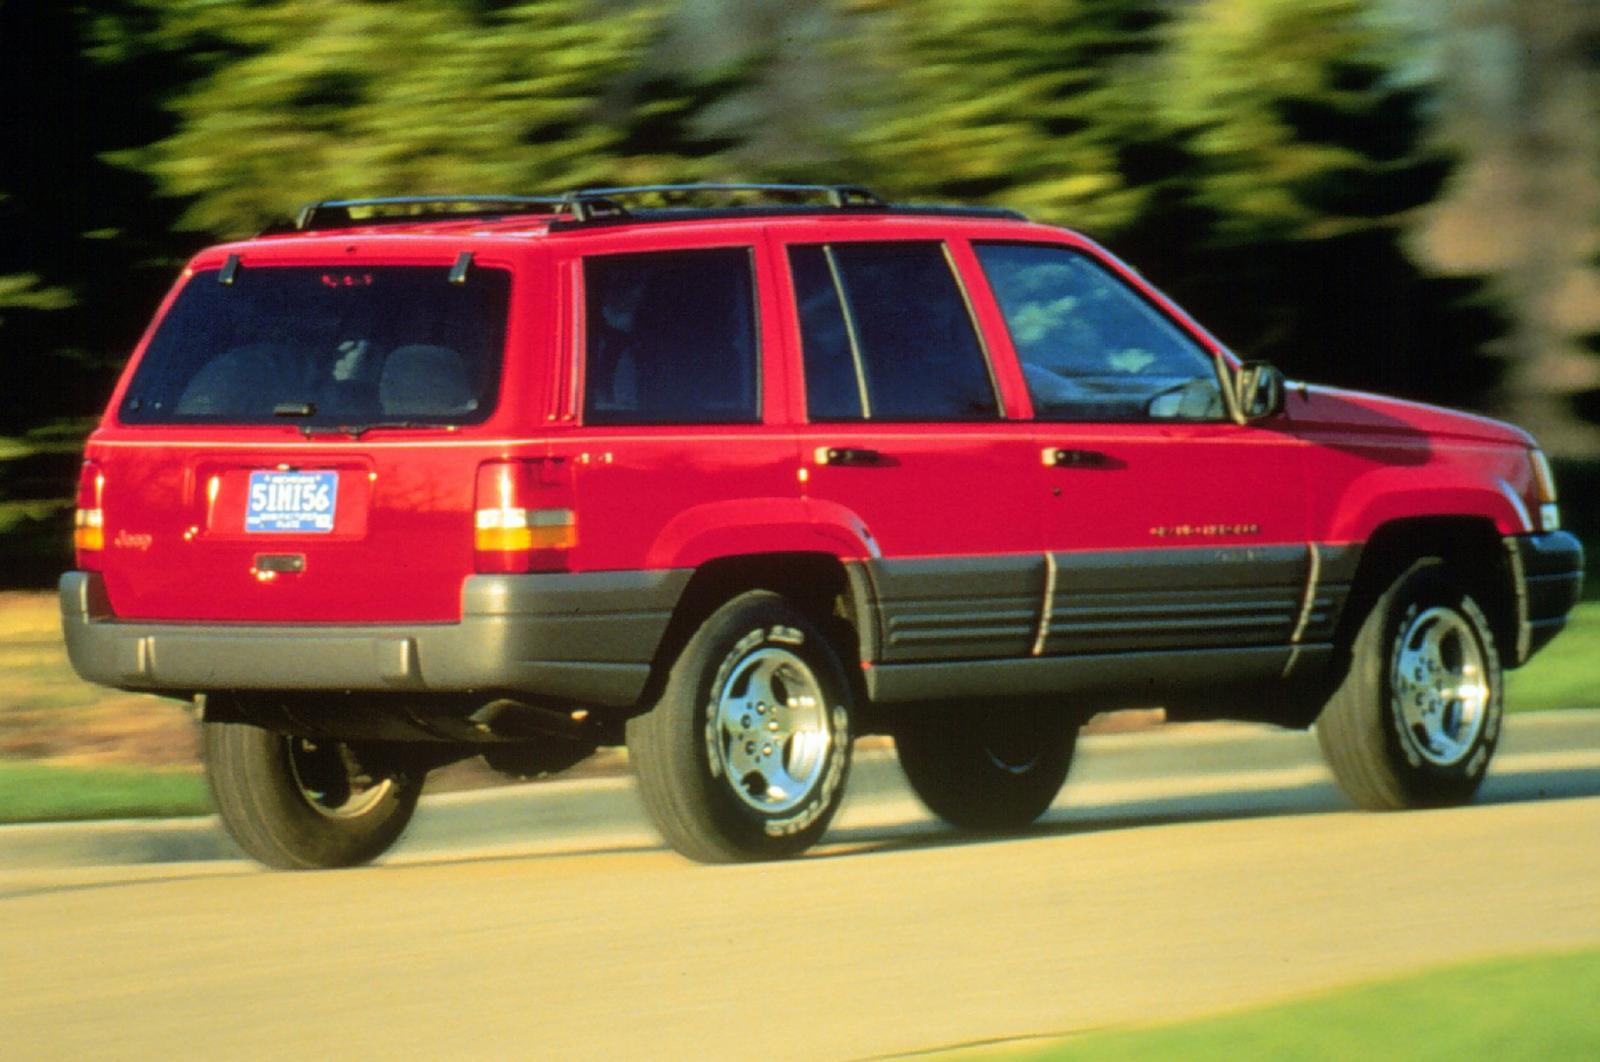 1997 Jeep Grand Cherokee Information And Photos Neo Drive